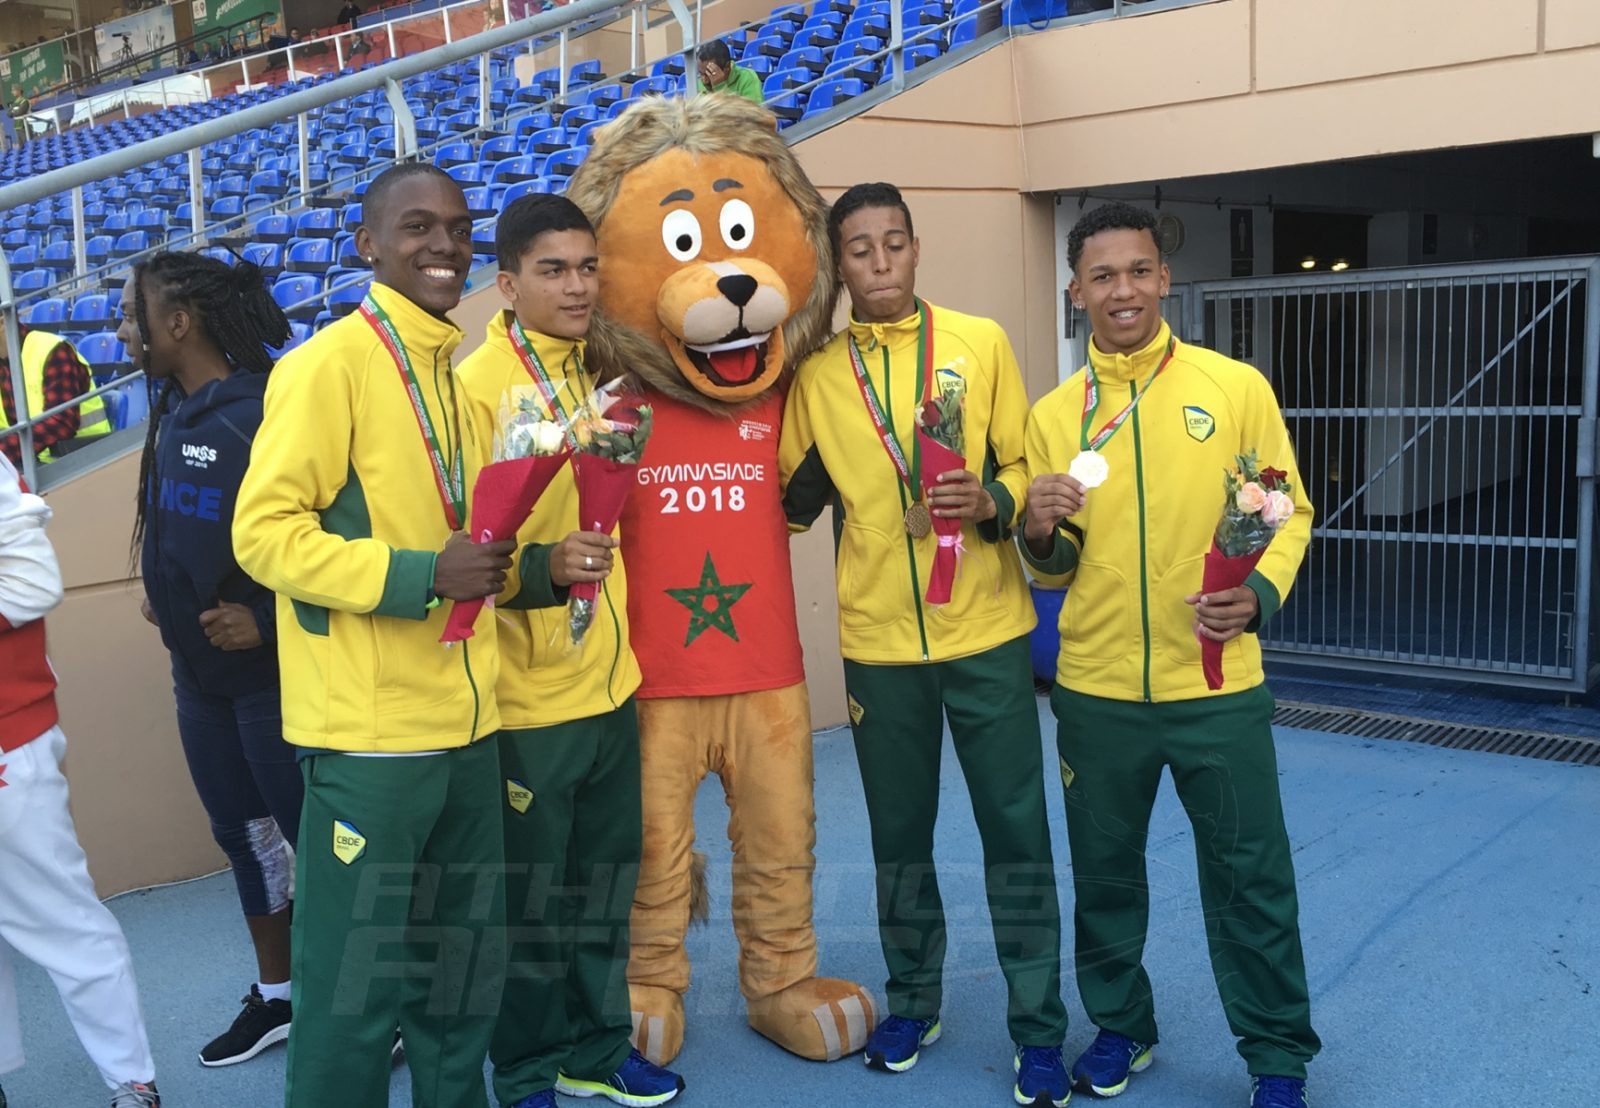 The Brazilian team after the Boys 4x100m relays medal presentation at Gymnasiade 2018 in Marrakech / Photo Credit: Yomi Omogbeja